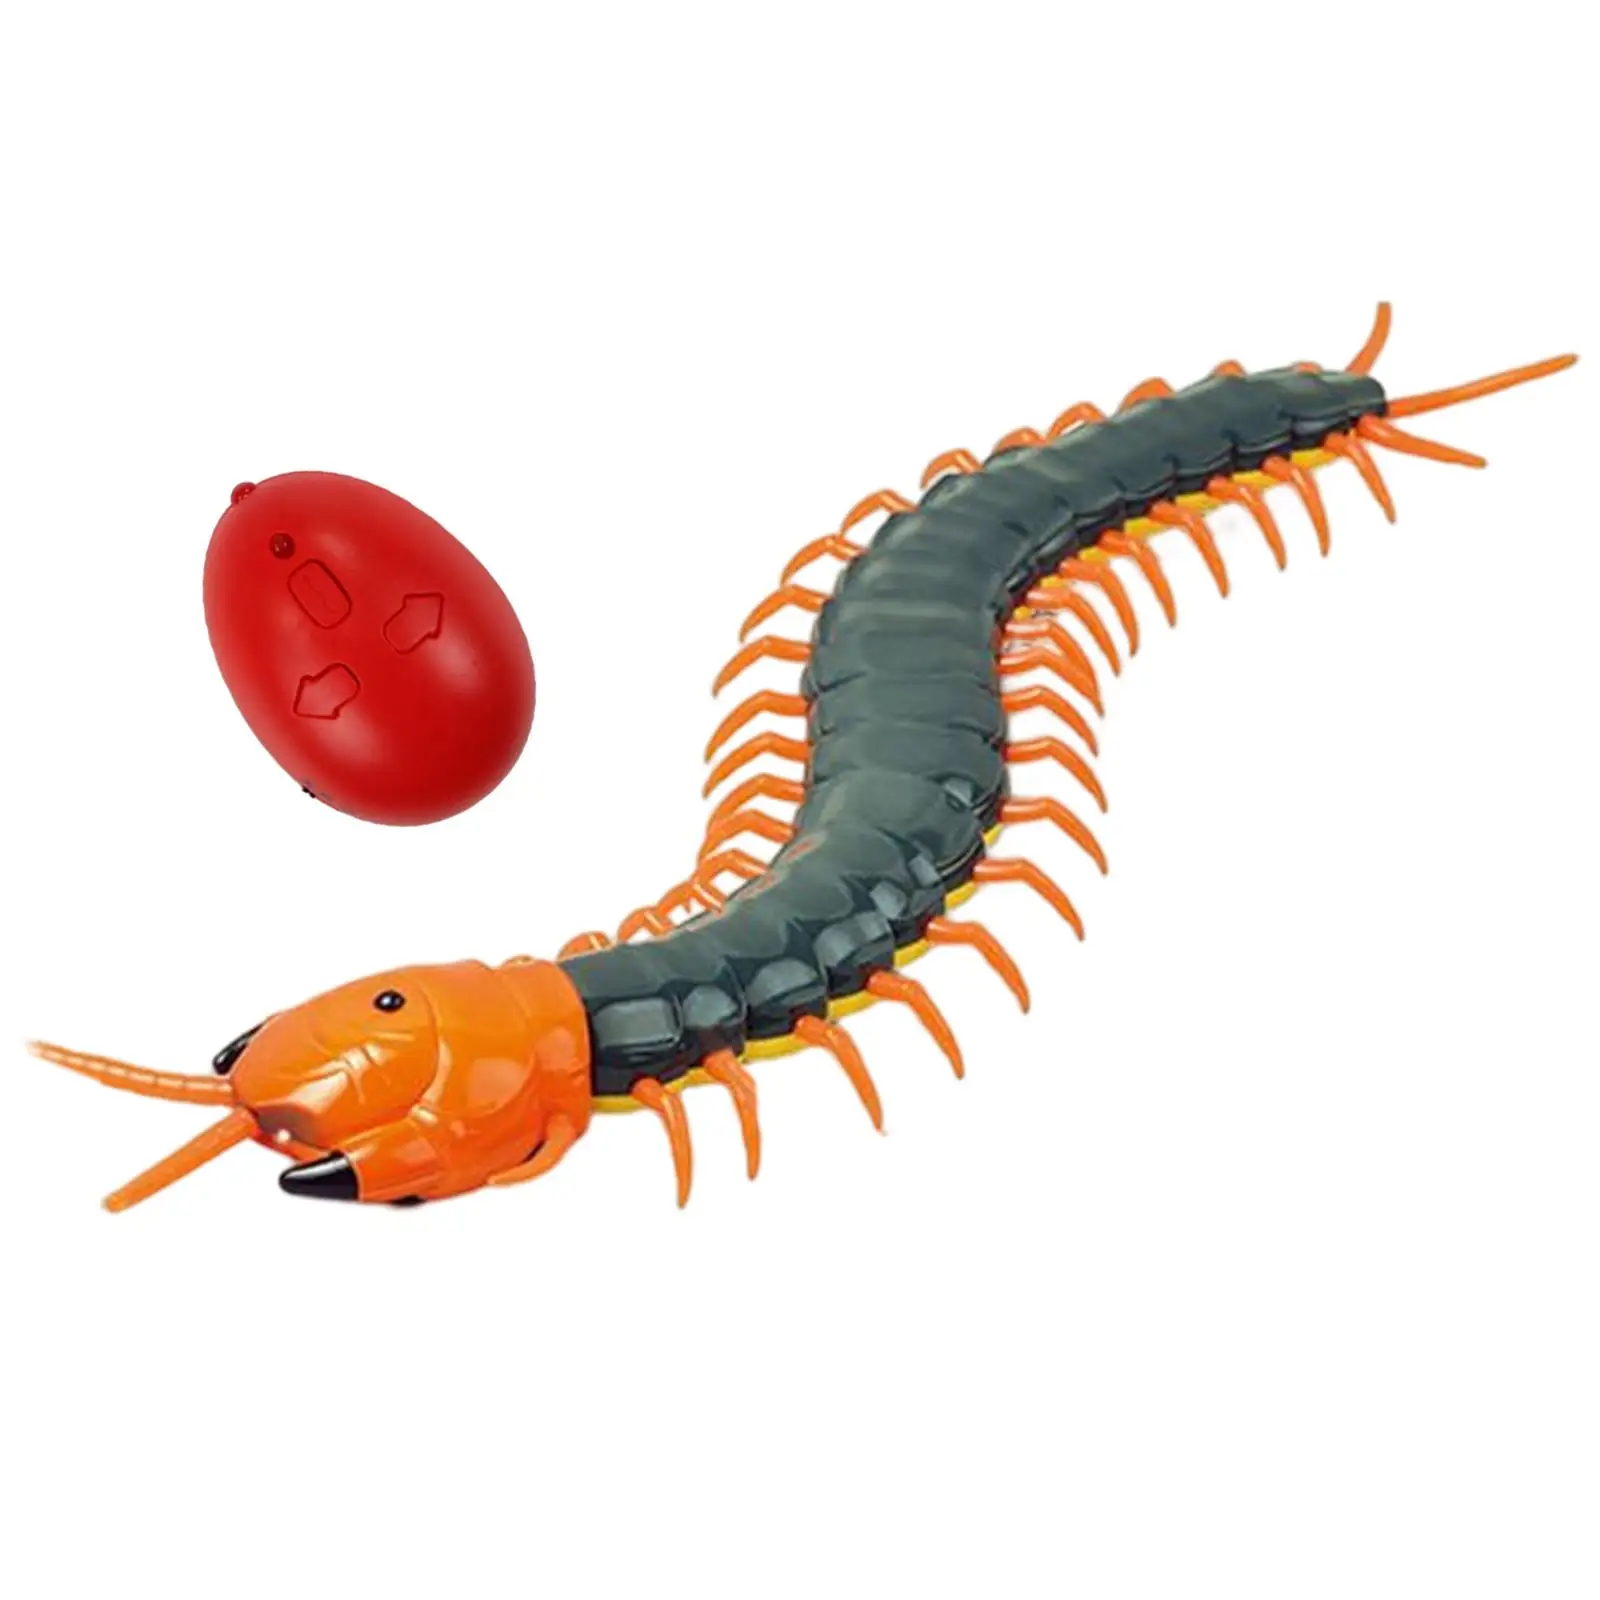 Smart Electric Centipede Toy Electric Remote Control Toy Tricky Props Cat Interactive USB Remote Control Centipede